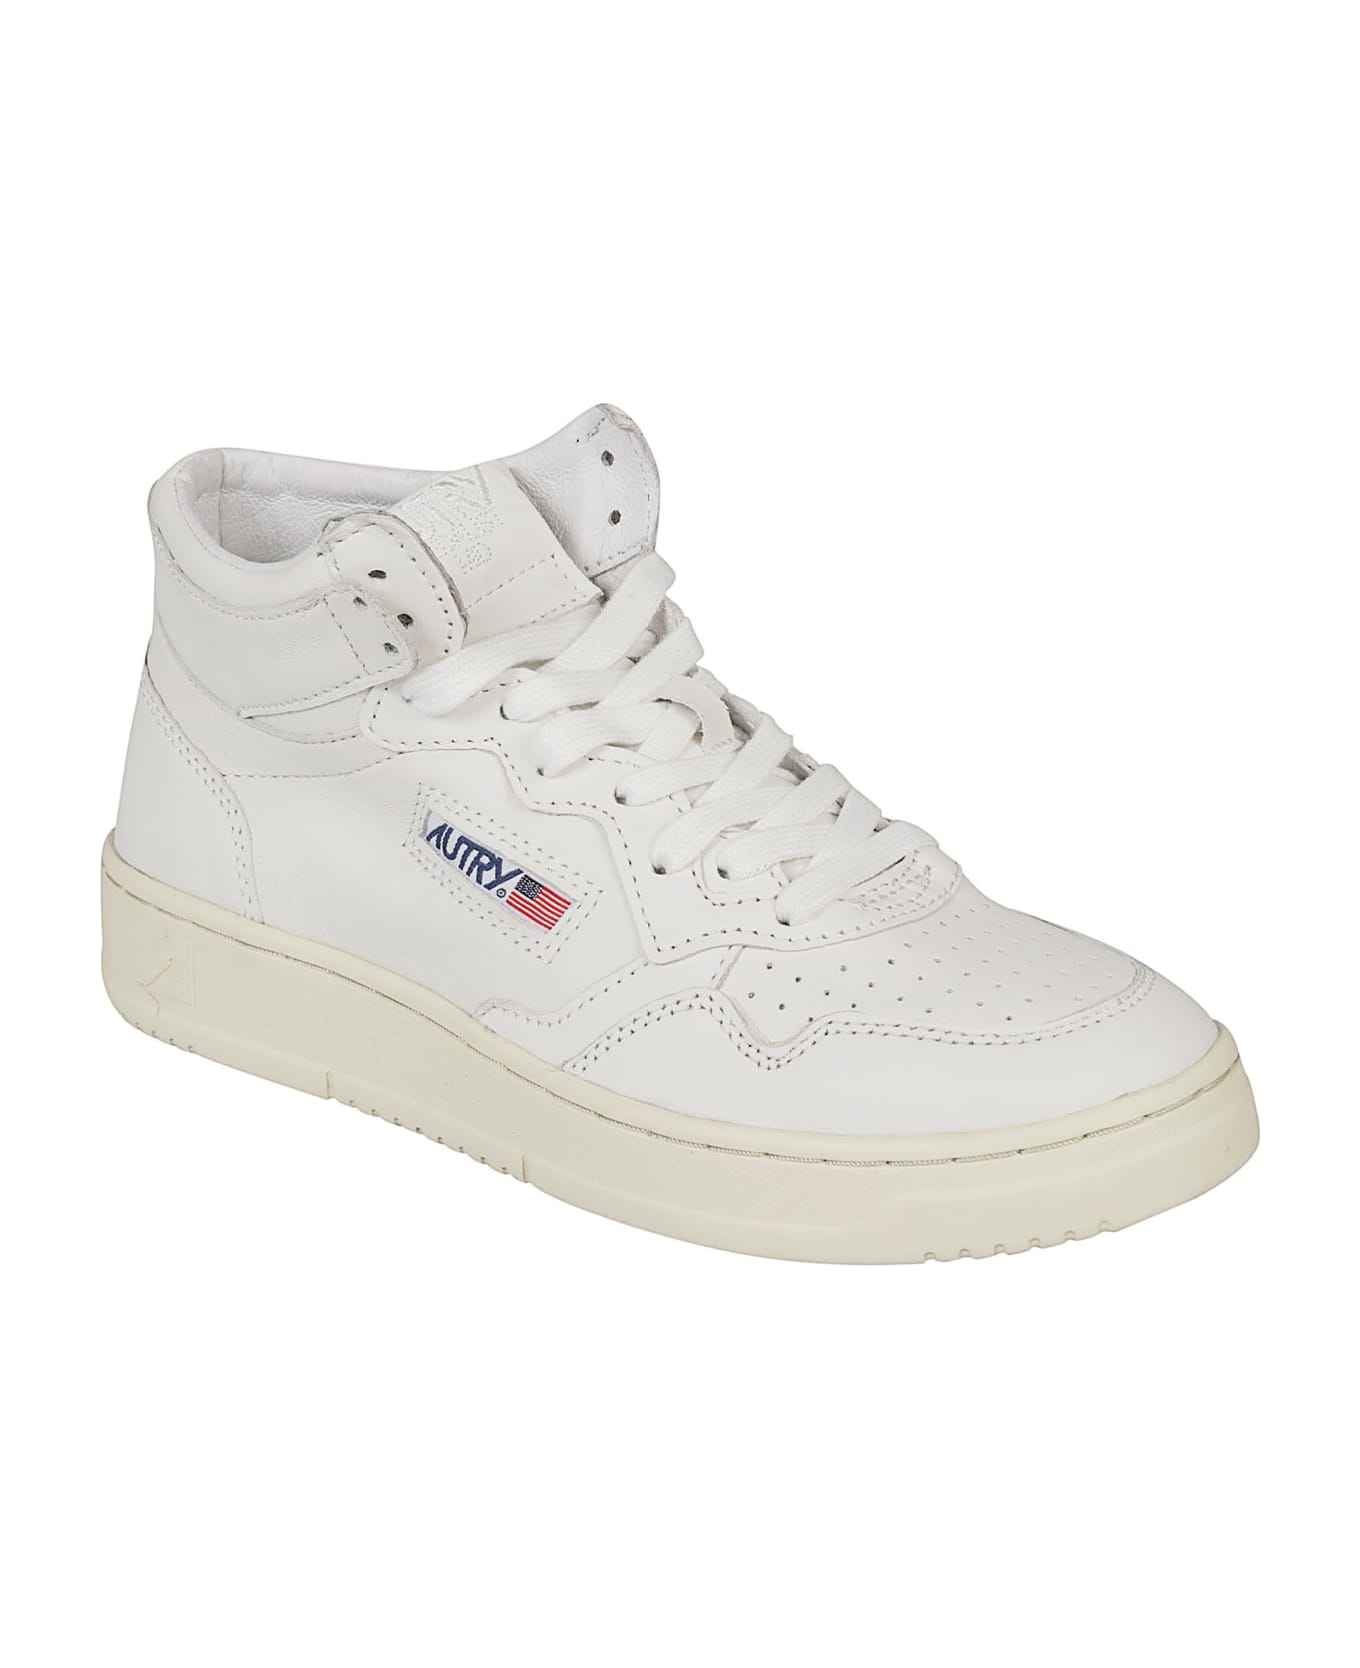 Autry Logo Patched High Sneakers - White